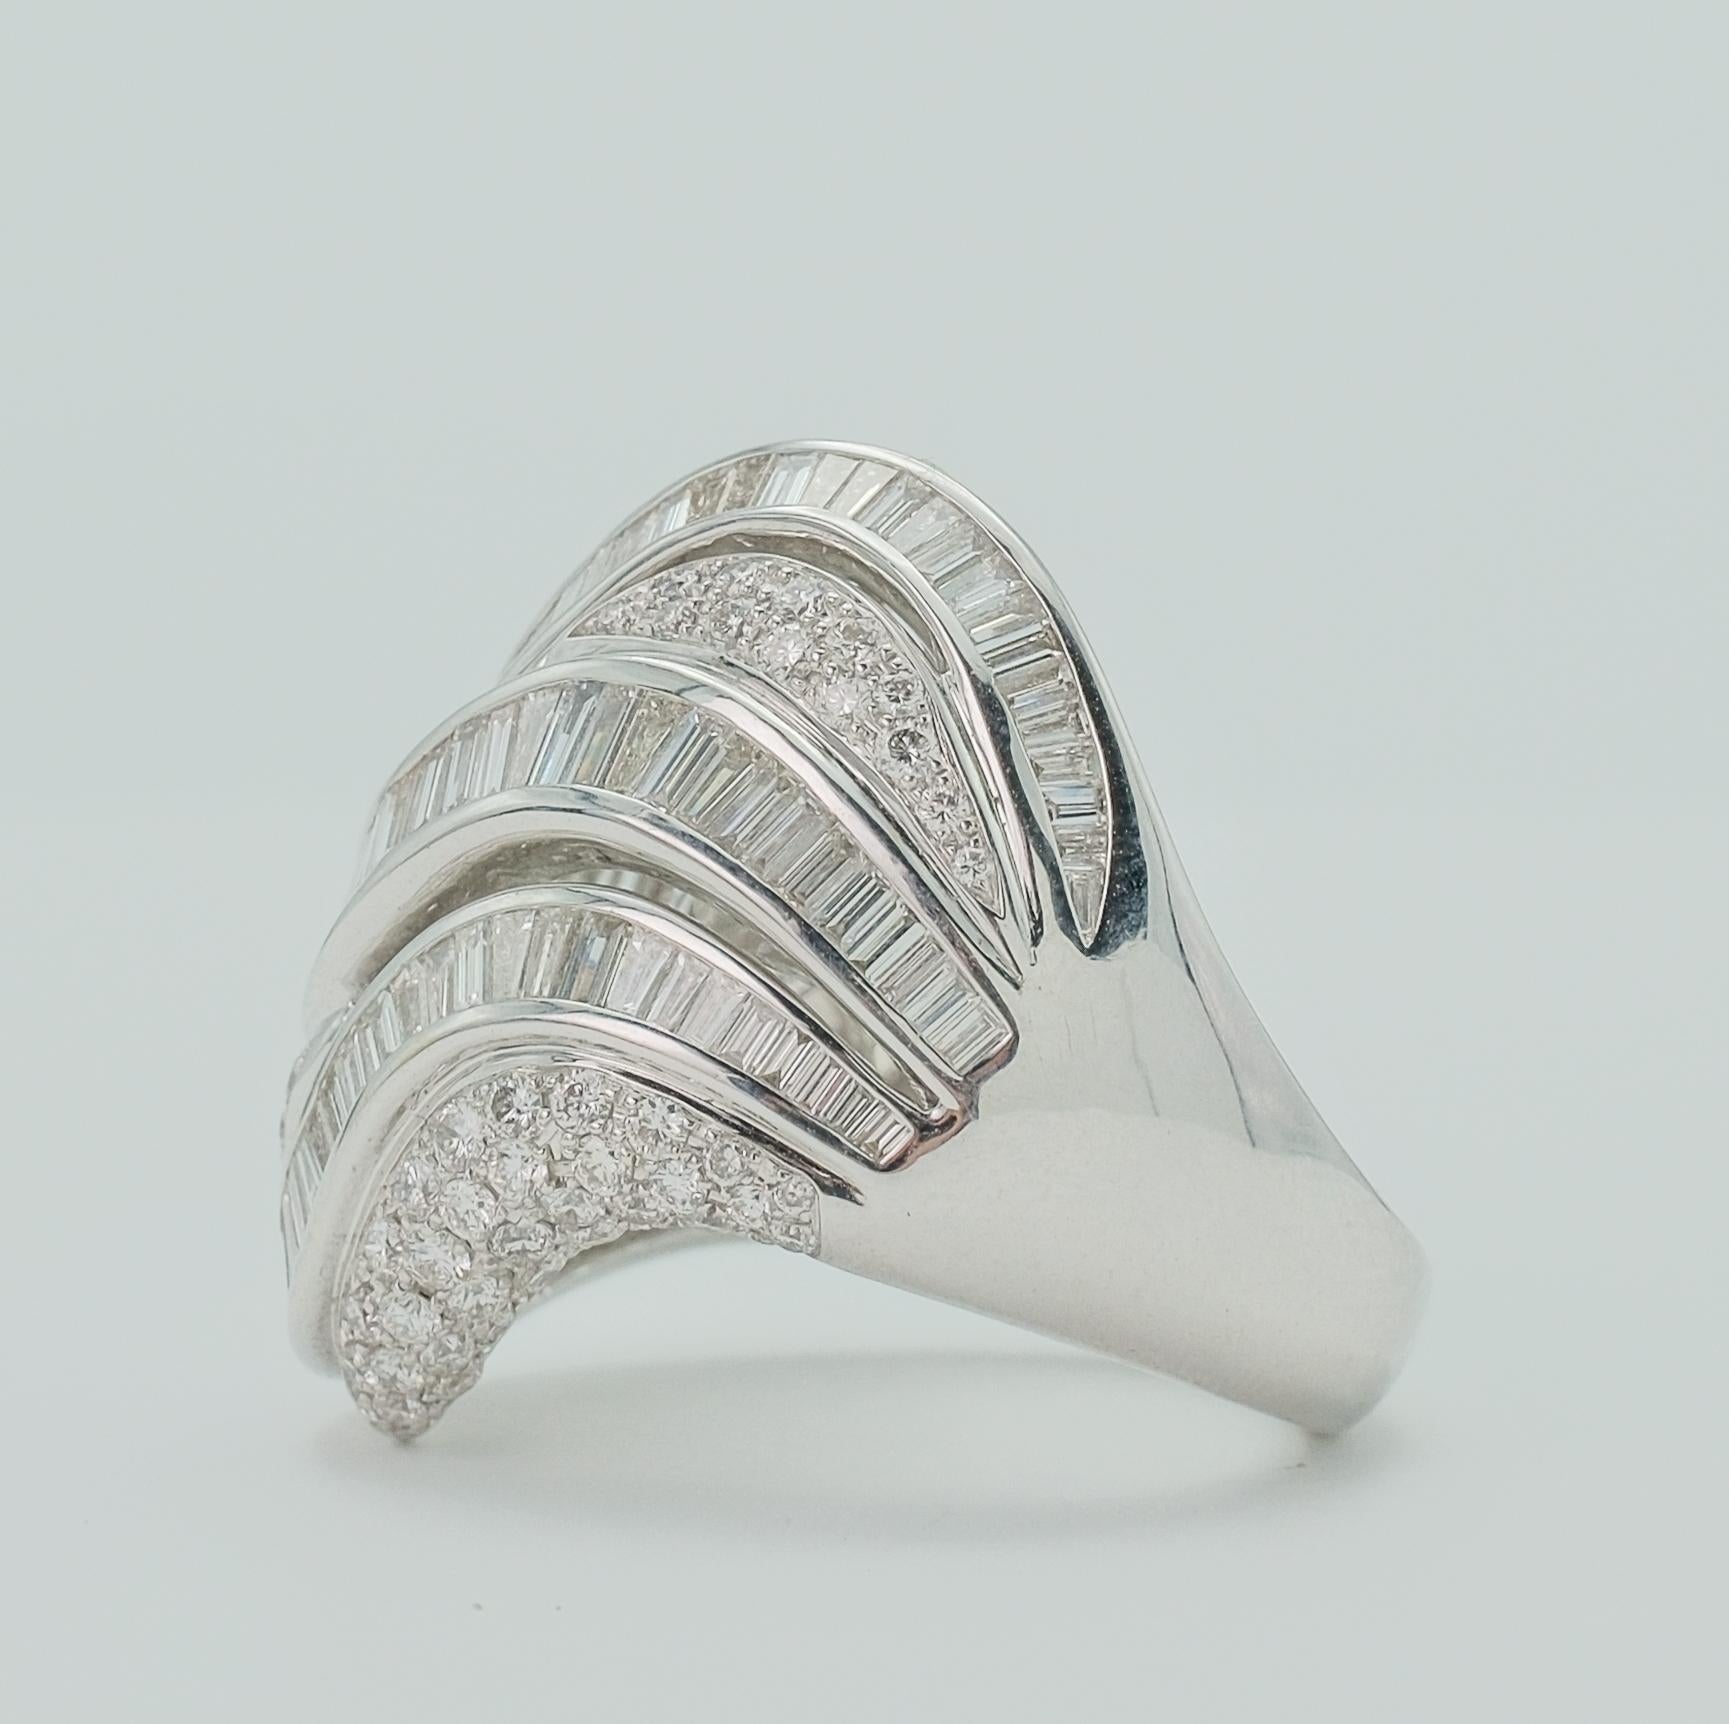 This exquisite 18k white gold diamond dome ring is a testament to expert craftsmanship. The ring features an intricate assembly of baguette and round-cut diamonds, each chosen for their stunning GH color and VS clarity. The gleaming band, crafted